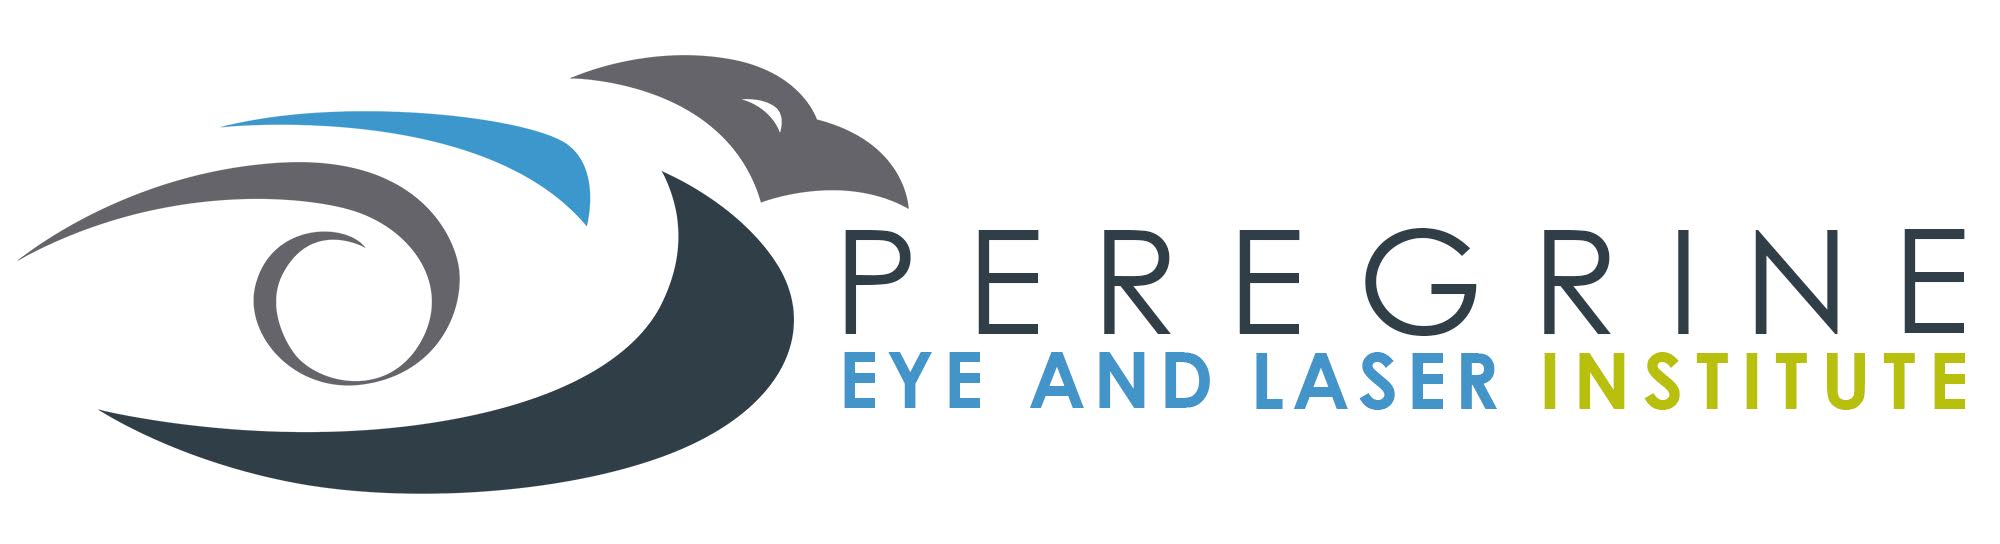 Peregrine Eye and Laser Institute